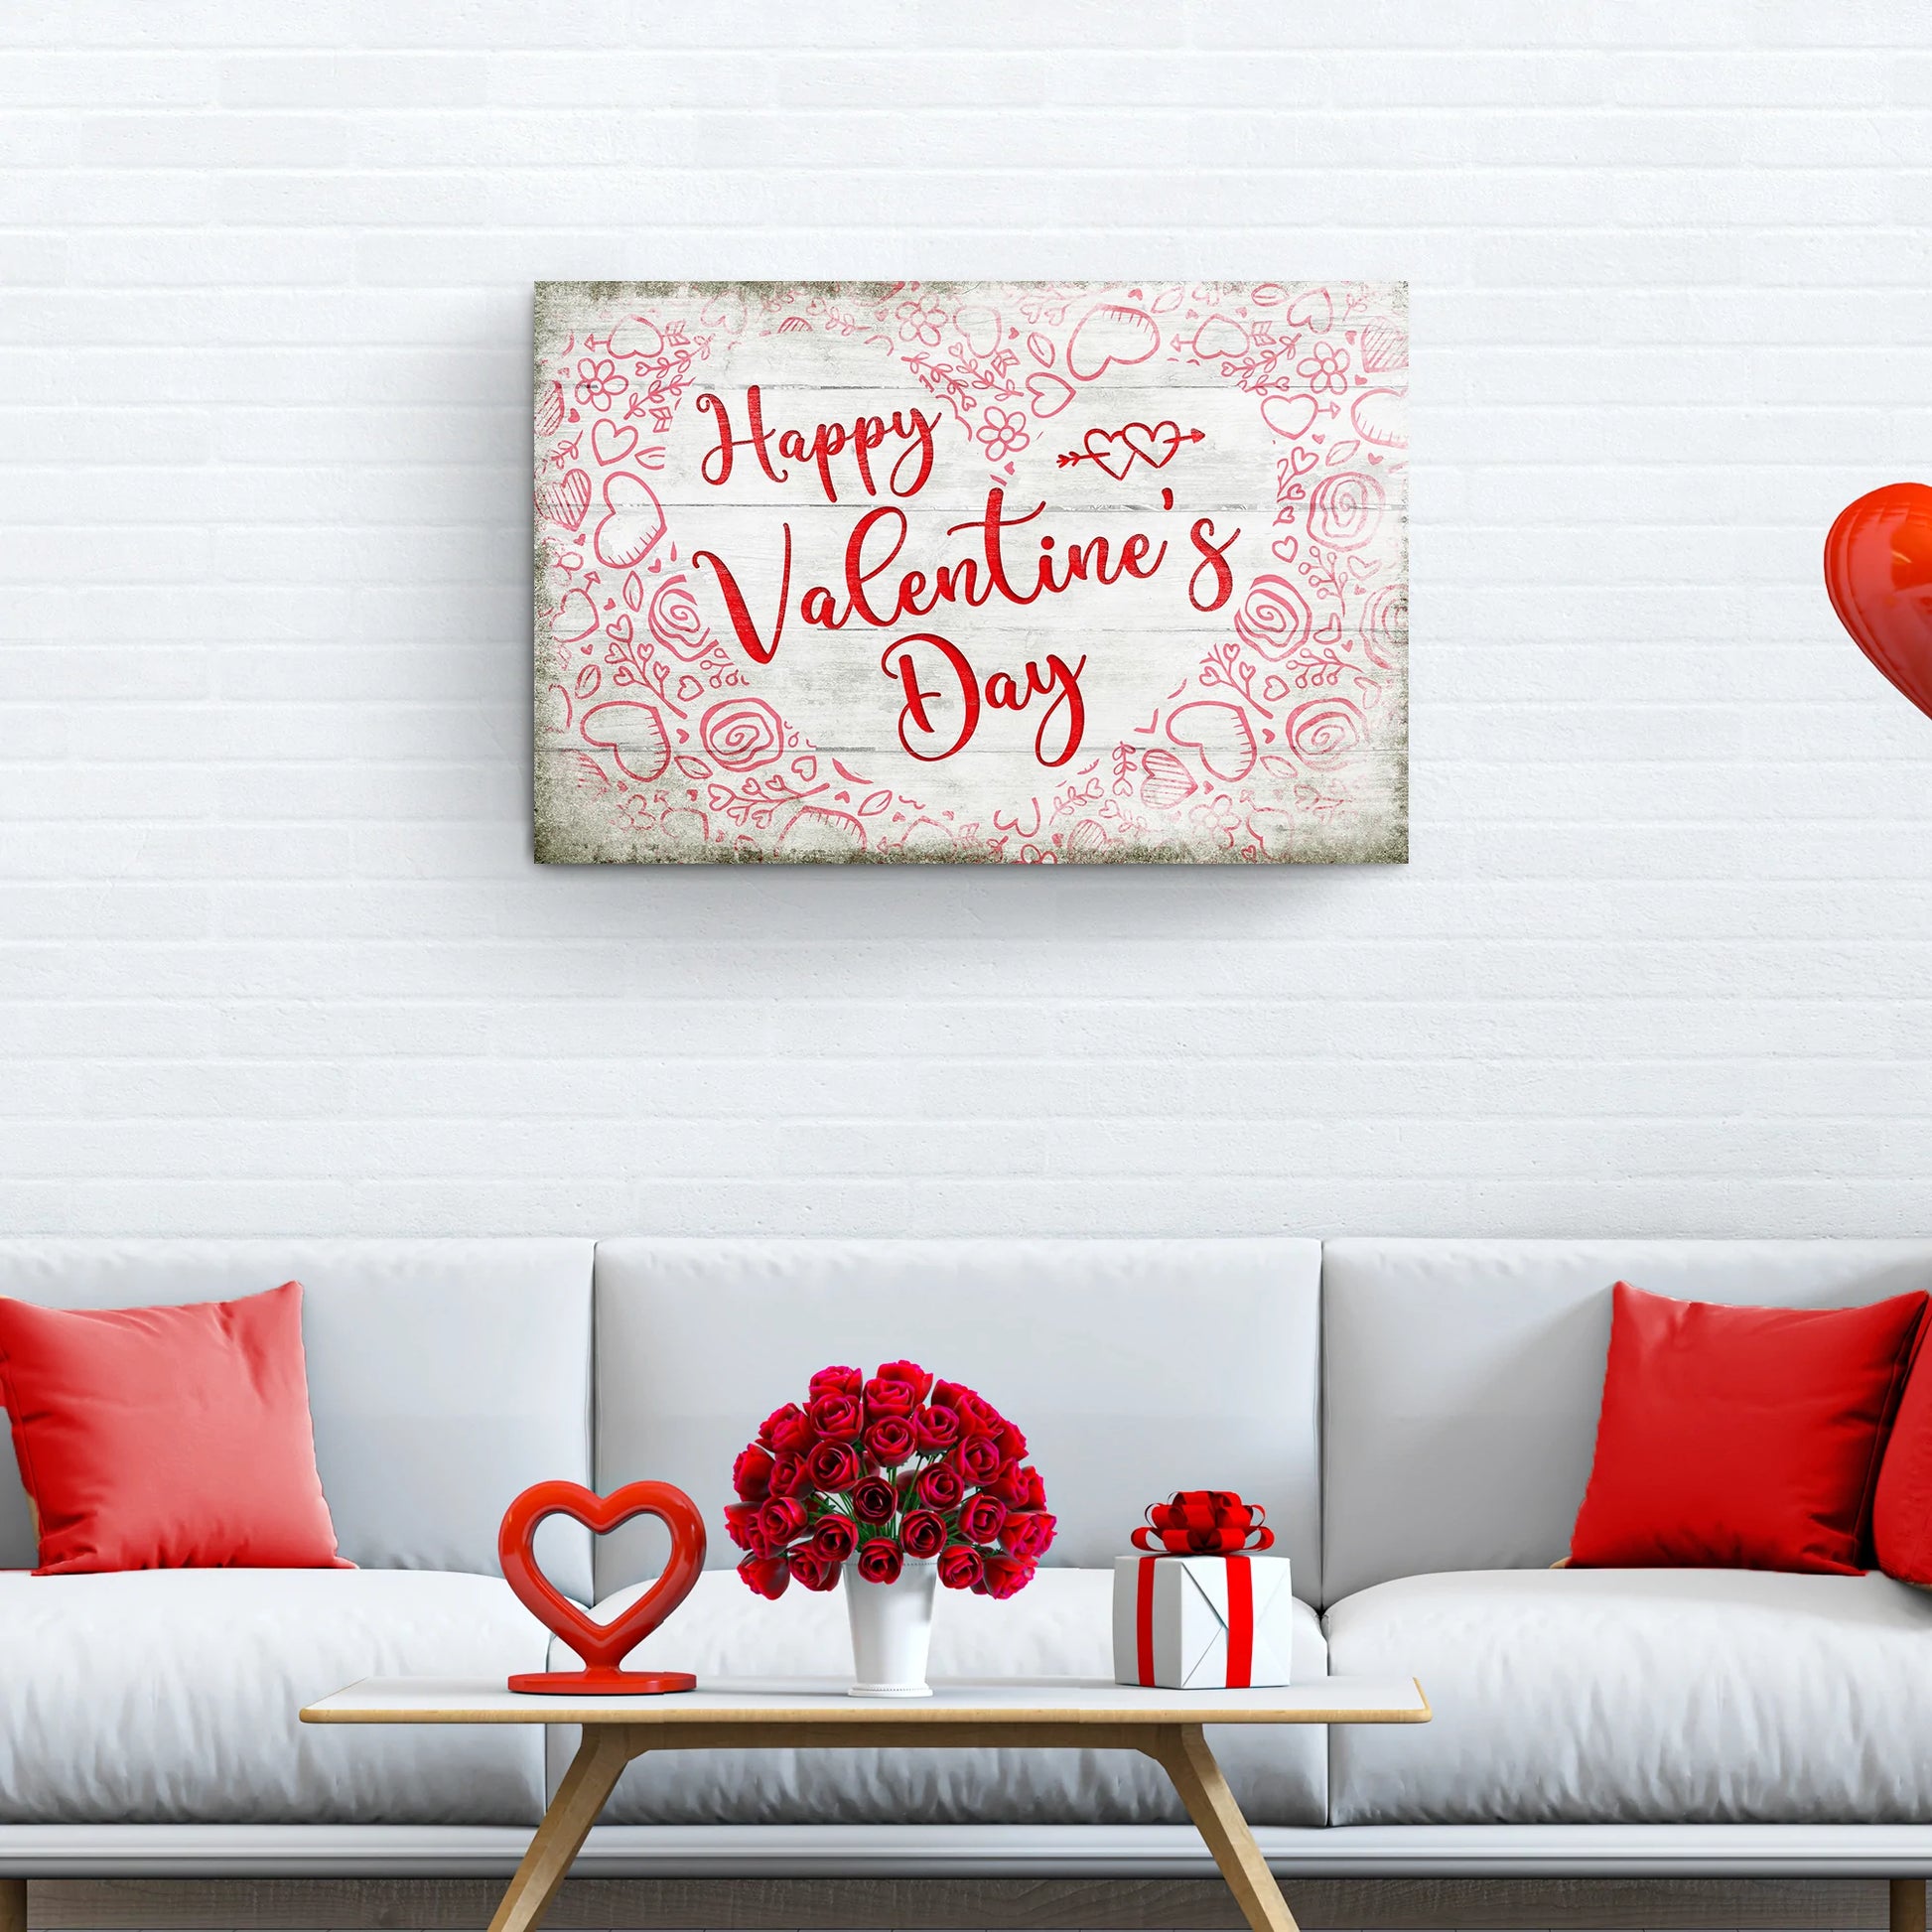 Hugs and Kisses Valentine Wishes Sign - Image by Tailored Canvases